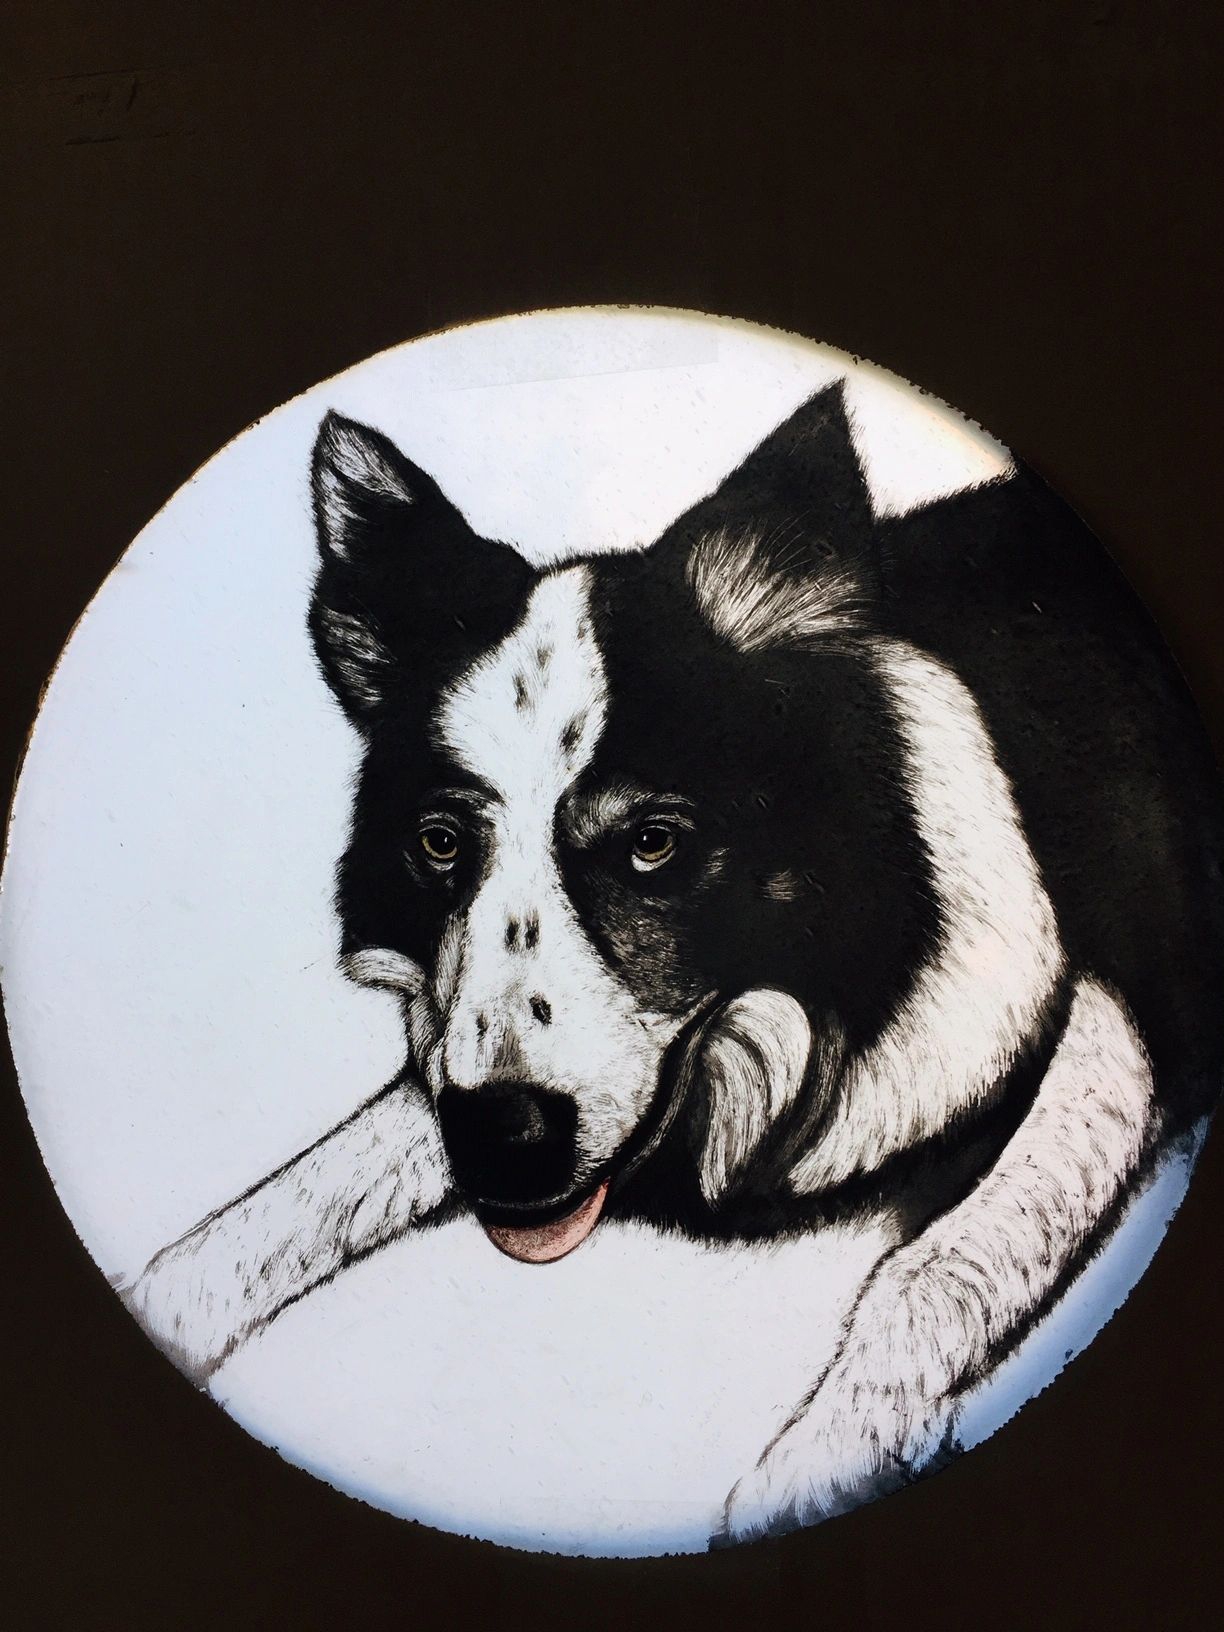 Painted stained glass portrait of a dog with black coat and white collar and forehead and nose